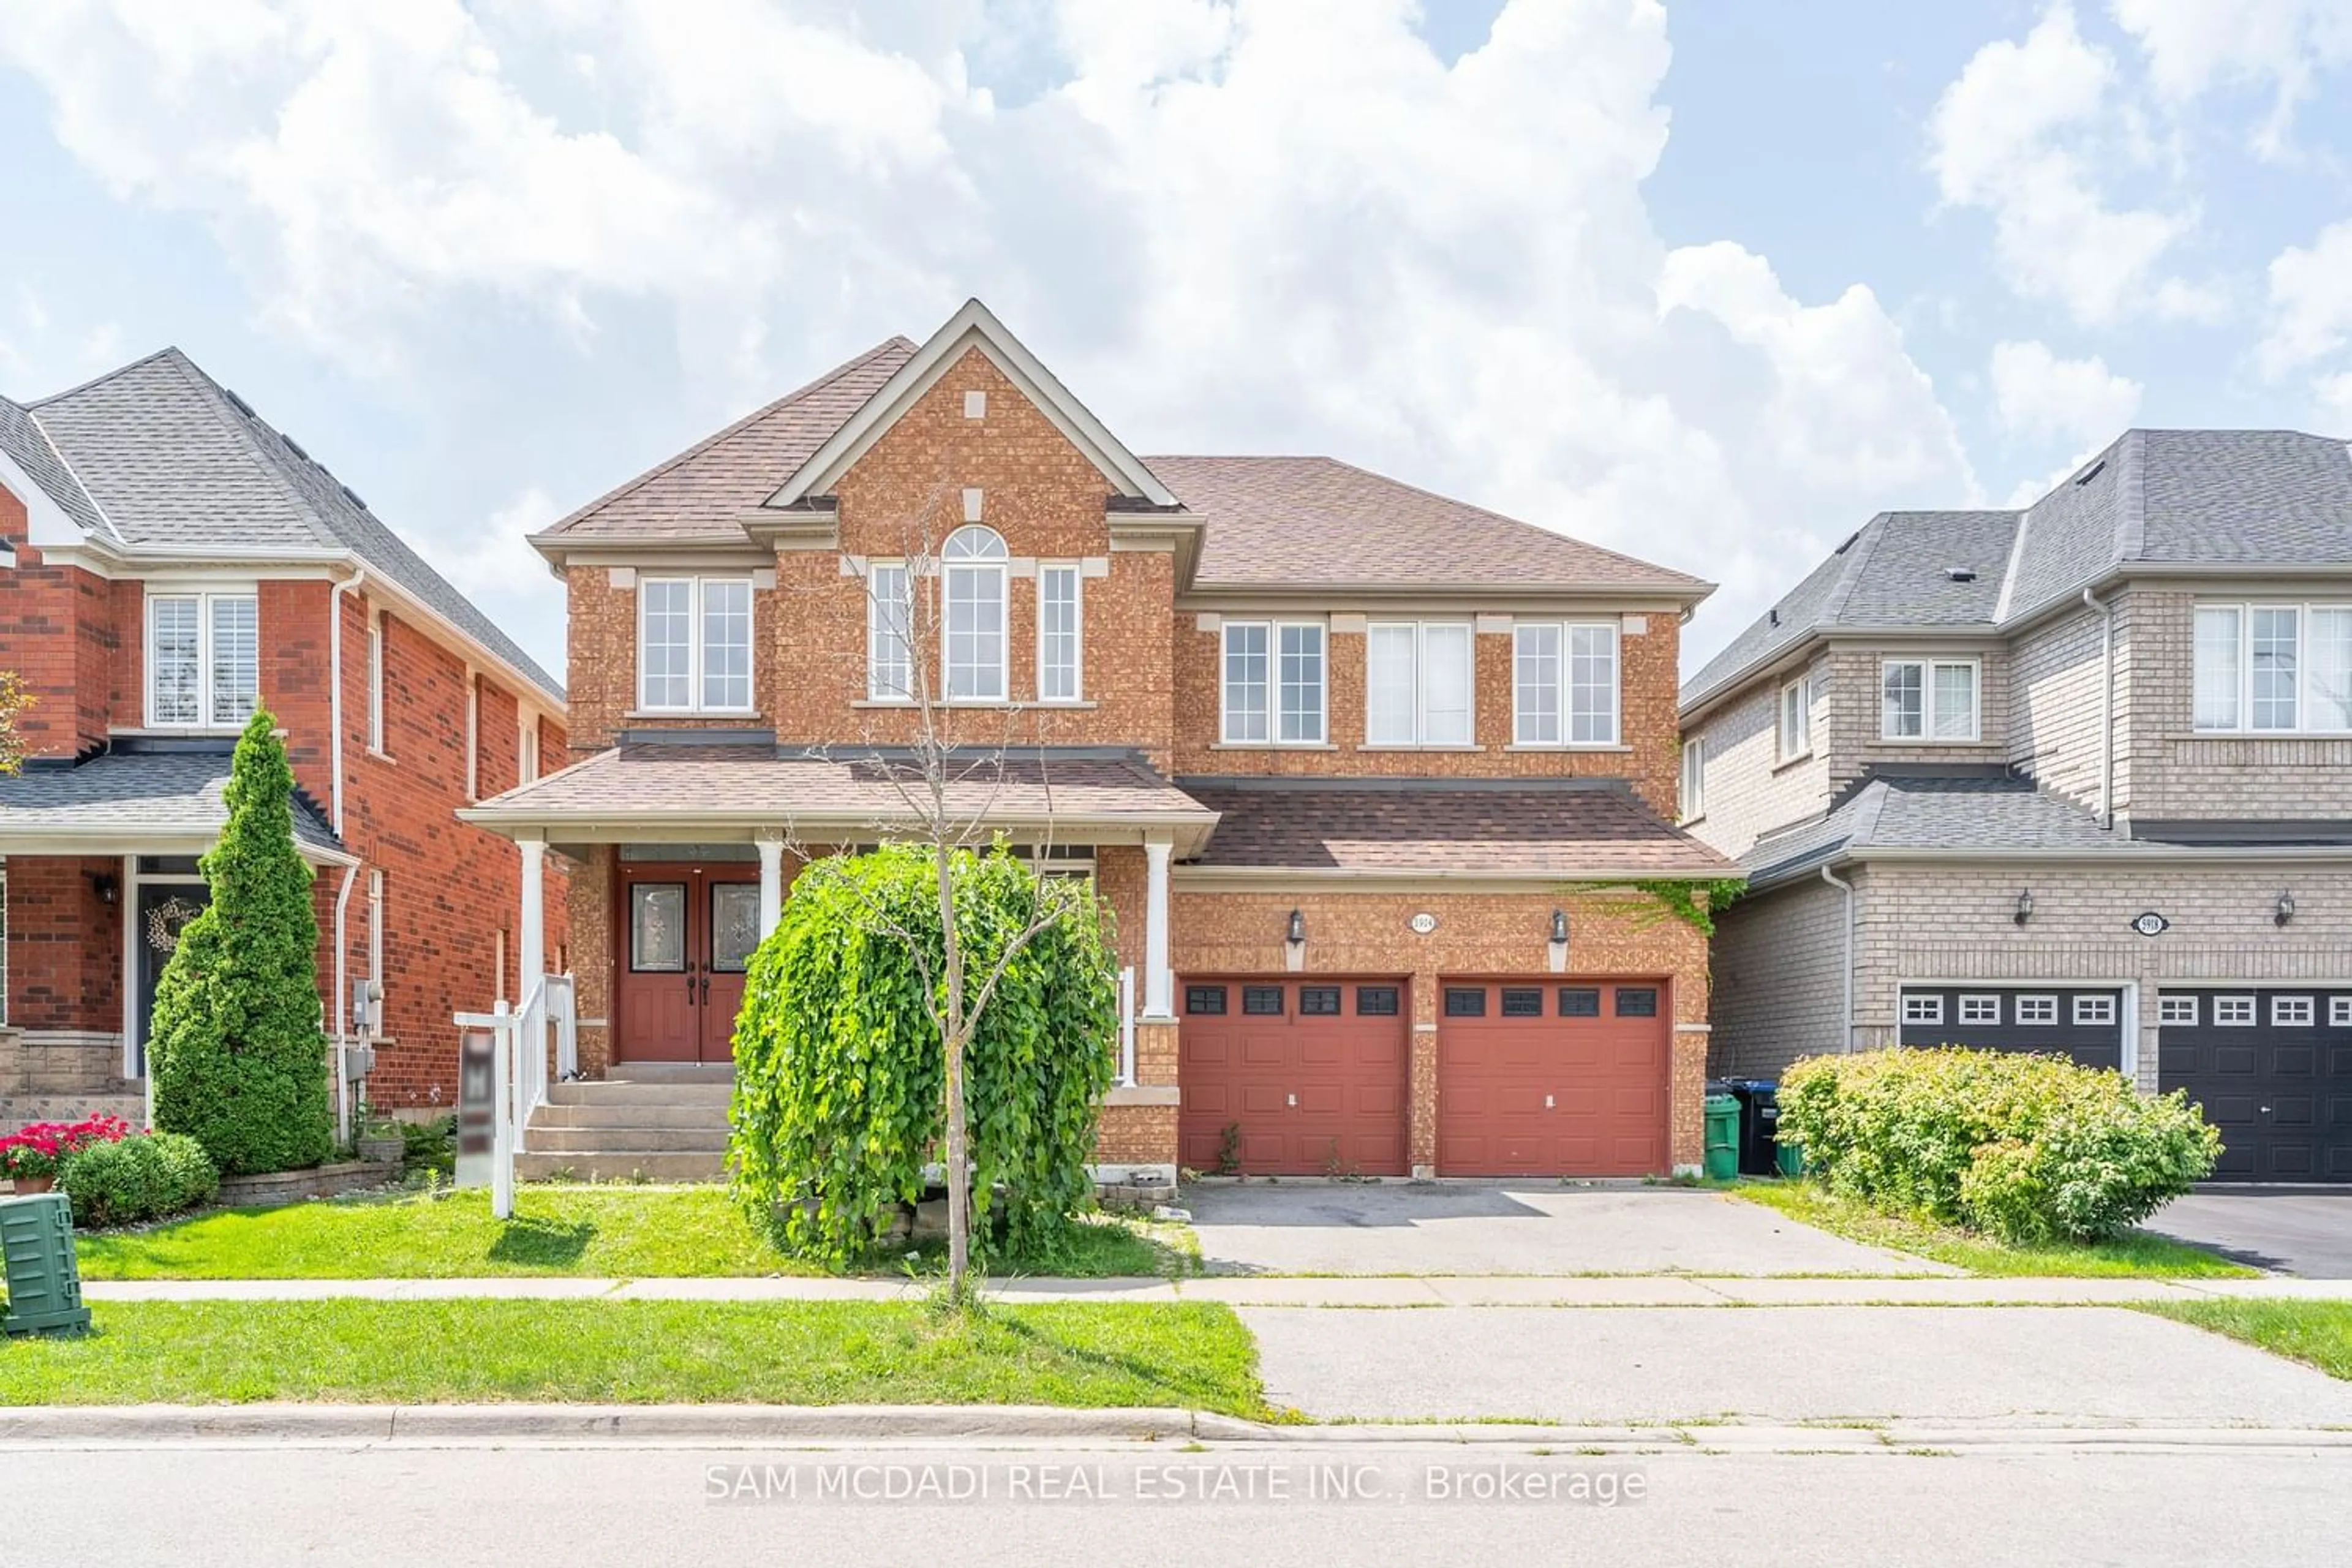 Home with brick exterior material for 5914 Long Valley Rd, Mississauga Ontario L5M 6J6